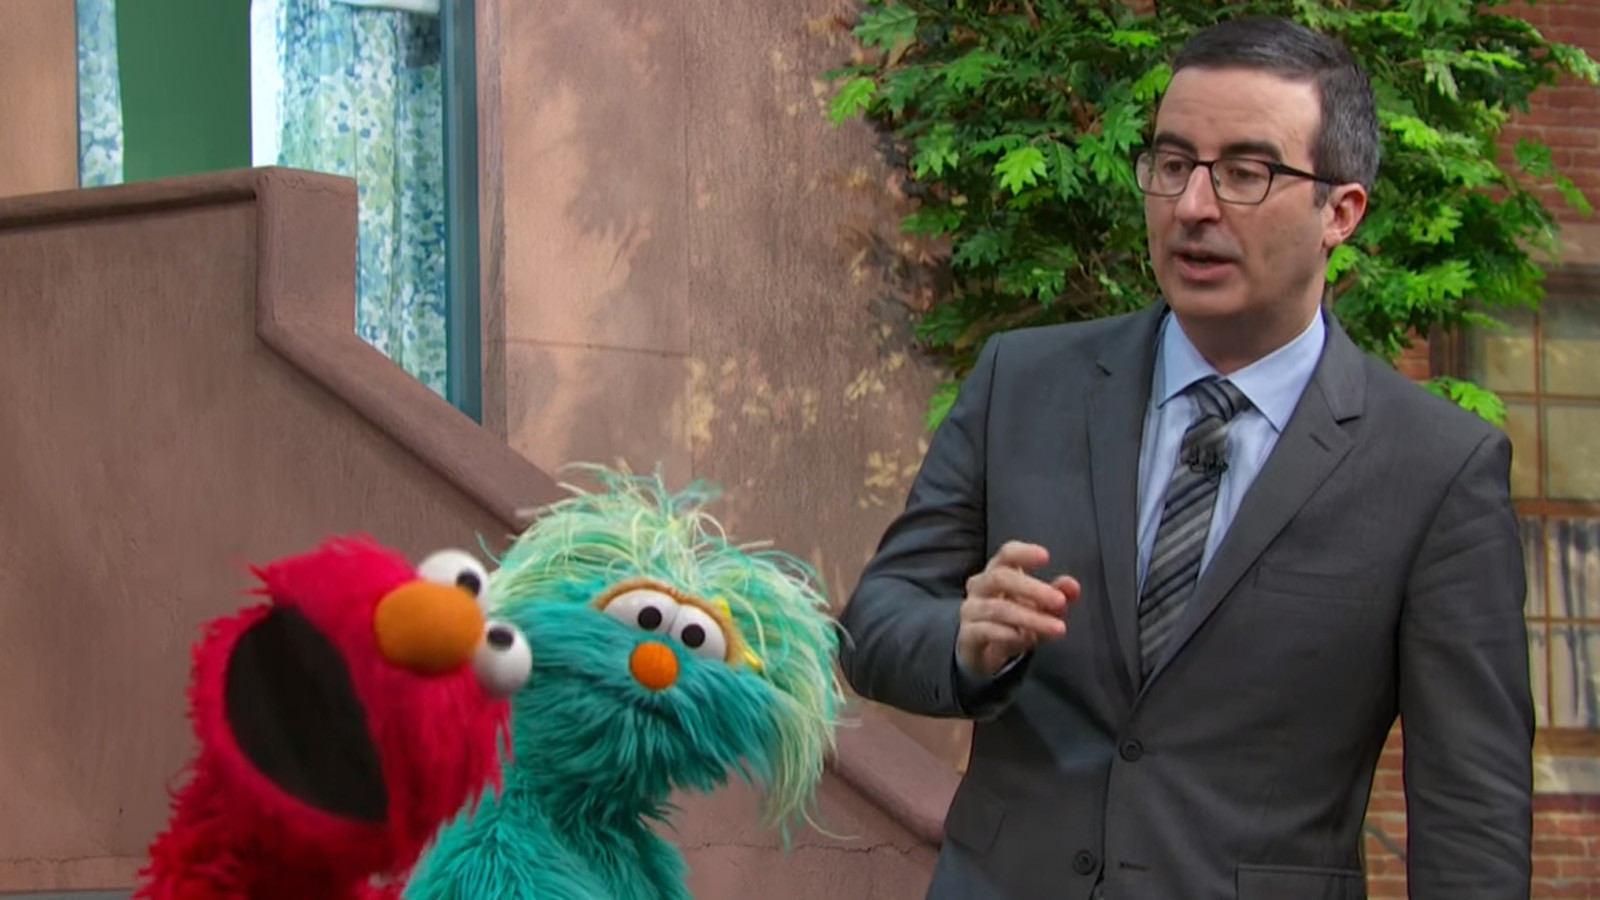 John Oliver calls attention to lead poisoning with help from 'Sesame Street ...1600 x 900